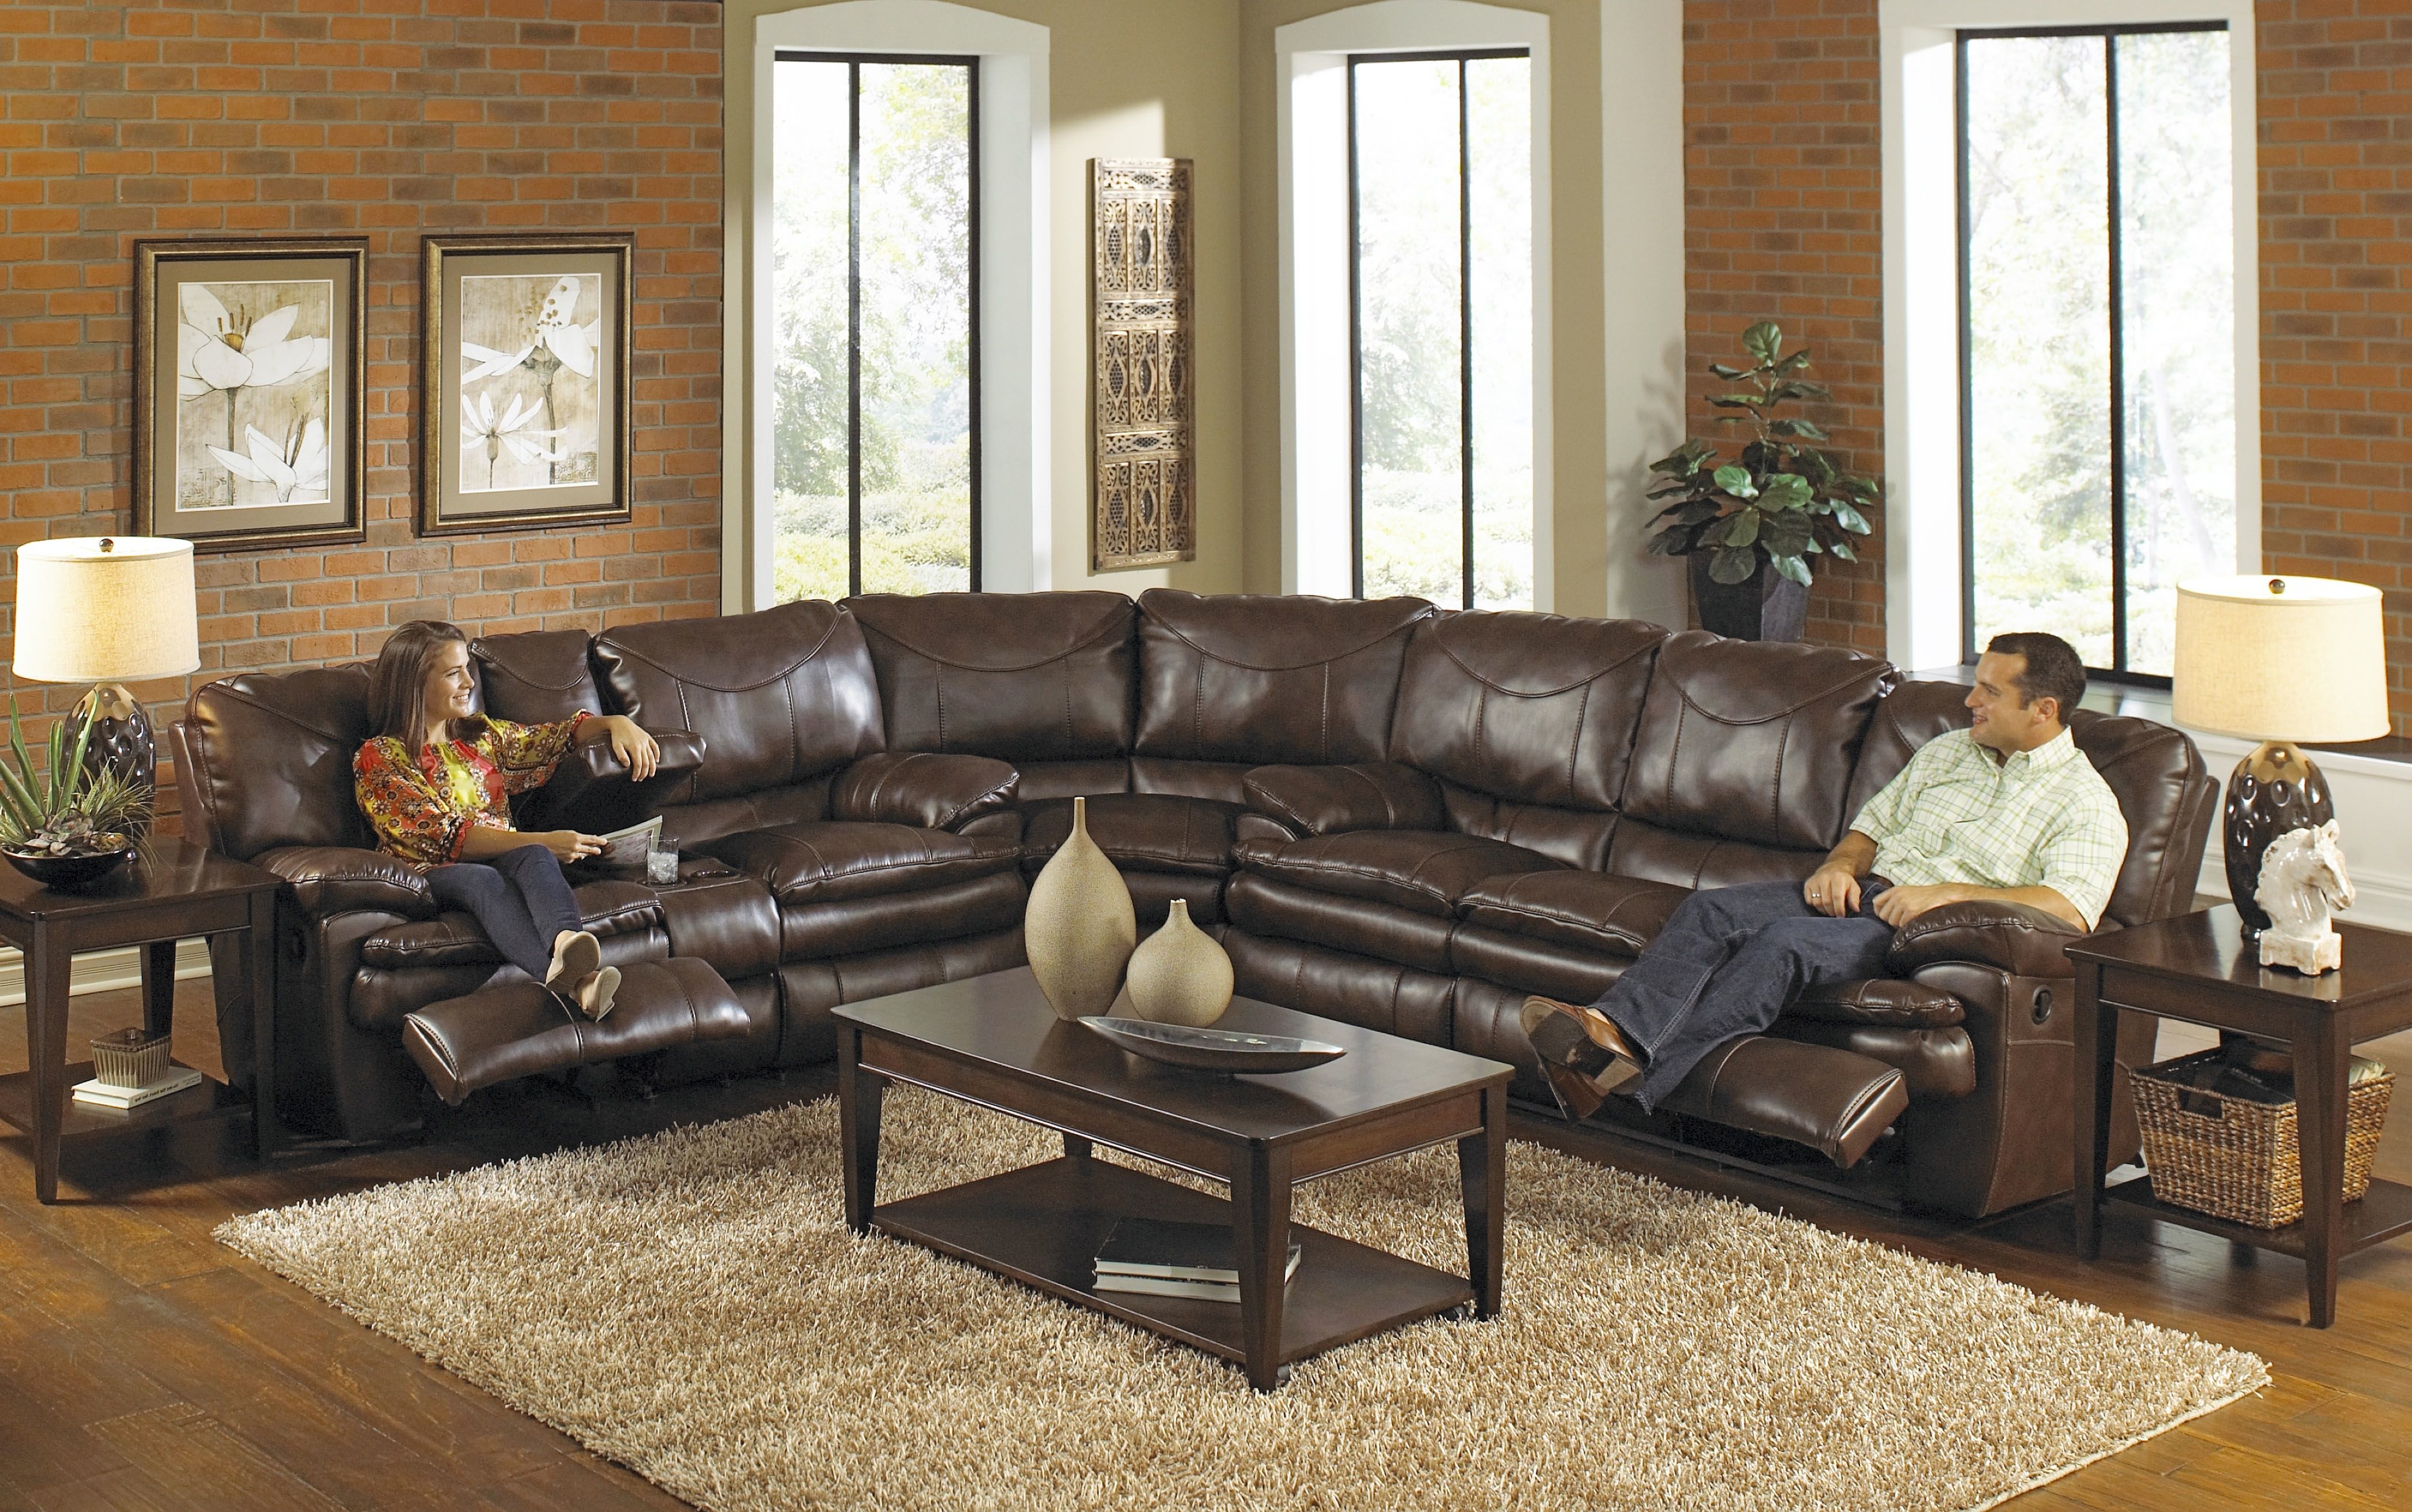 Most Recent High Quality Leather Sectional Sofas – Radiovannes Intended For Quality Sectional Sofas (View 1 of 20)